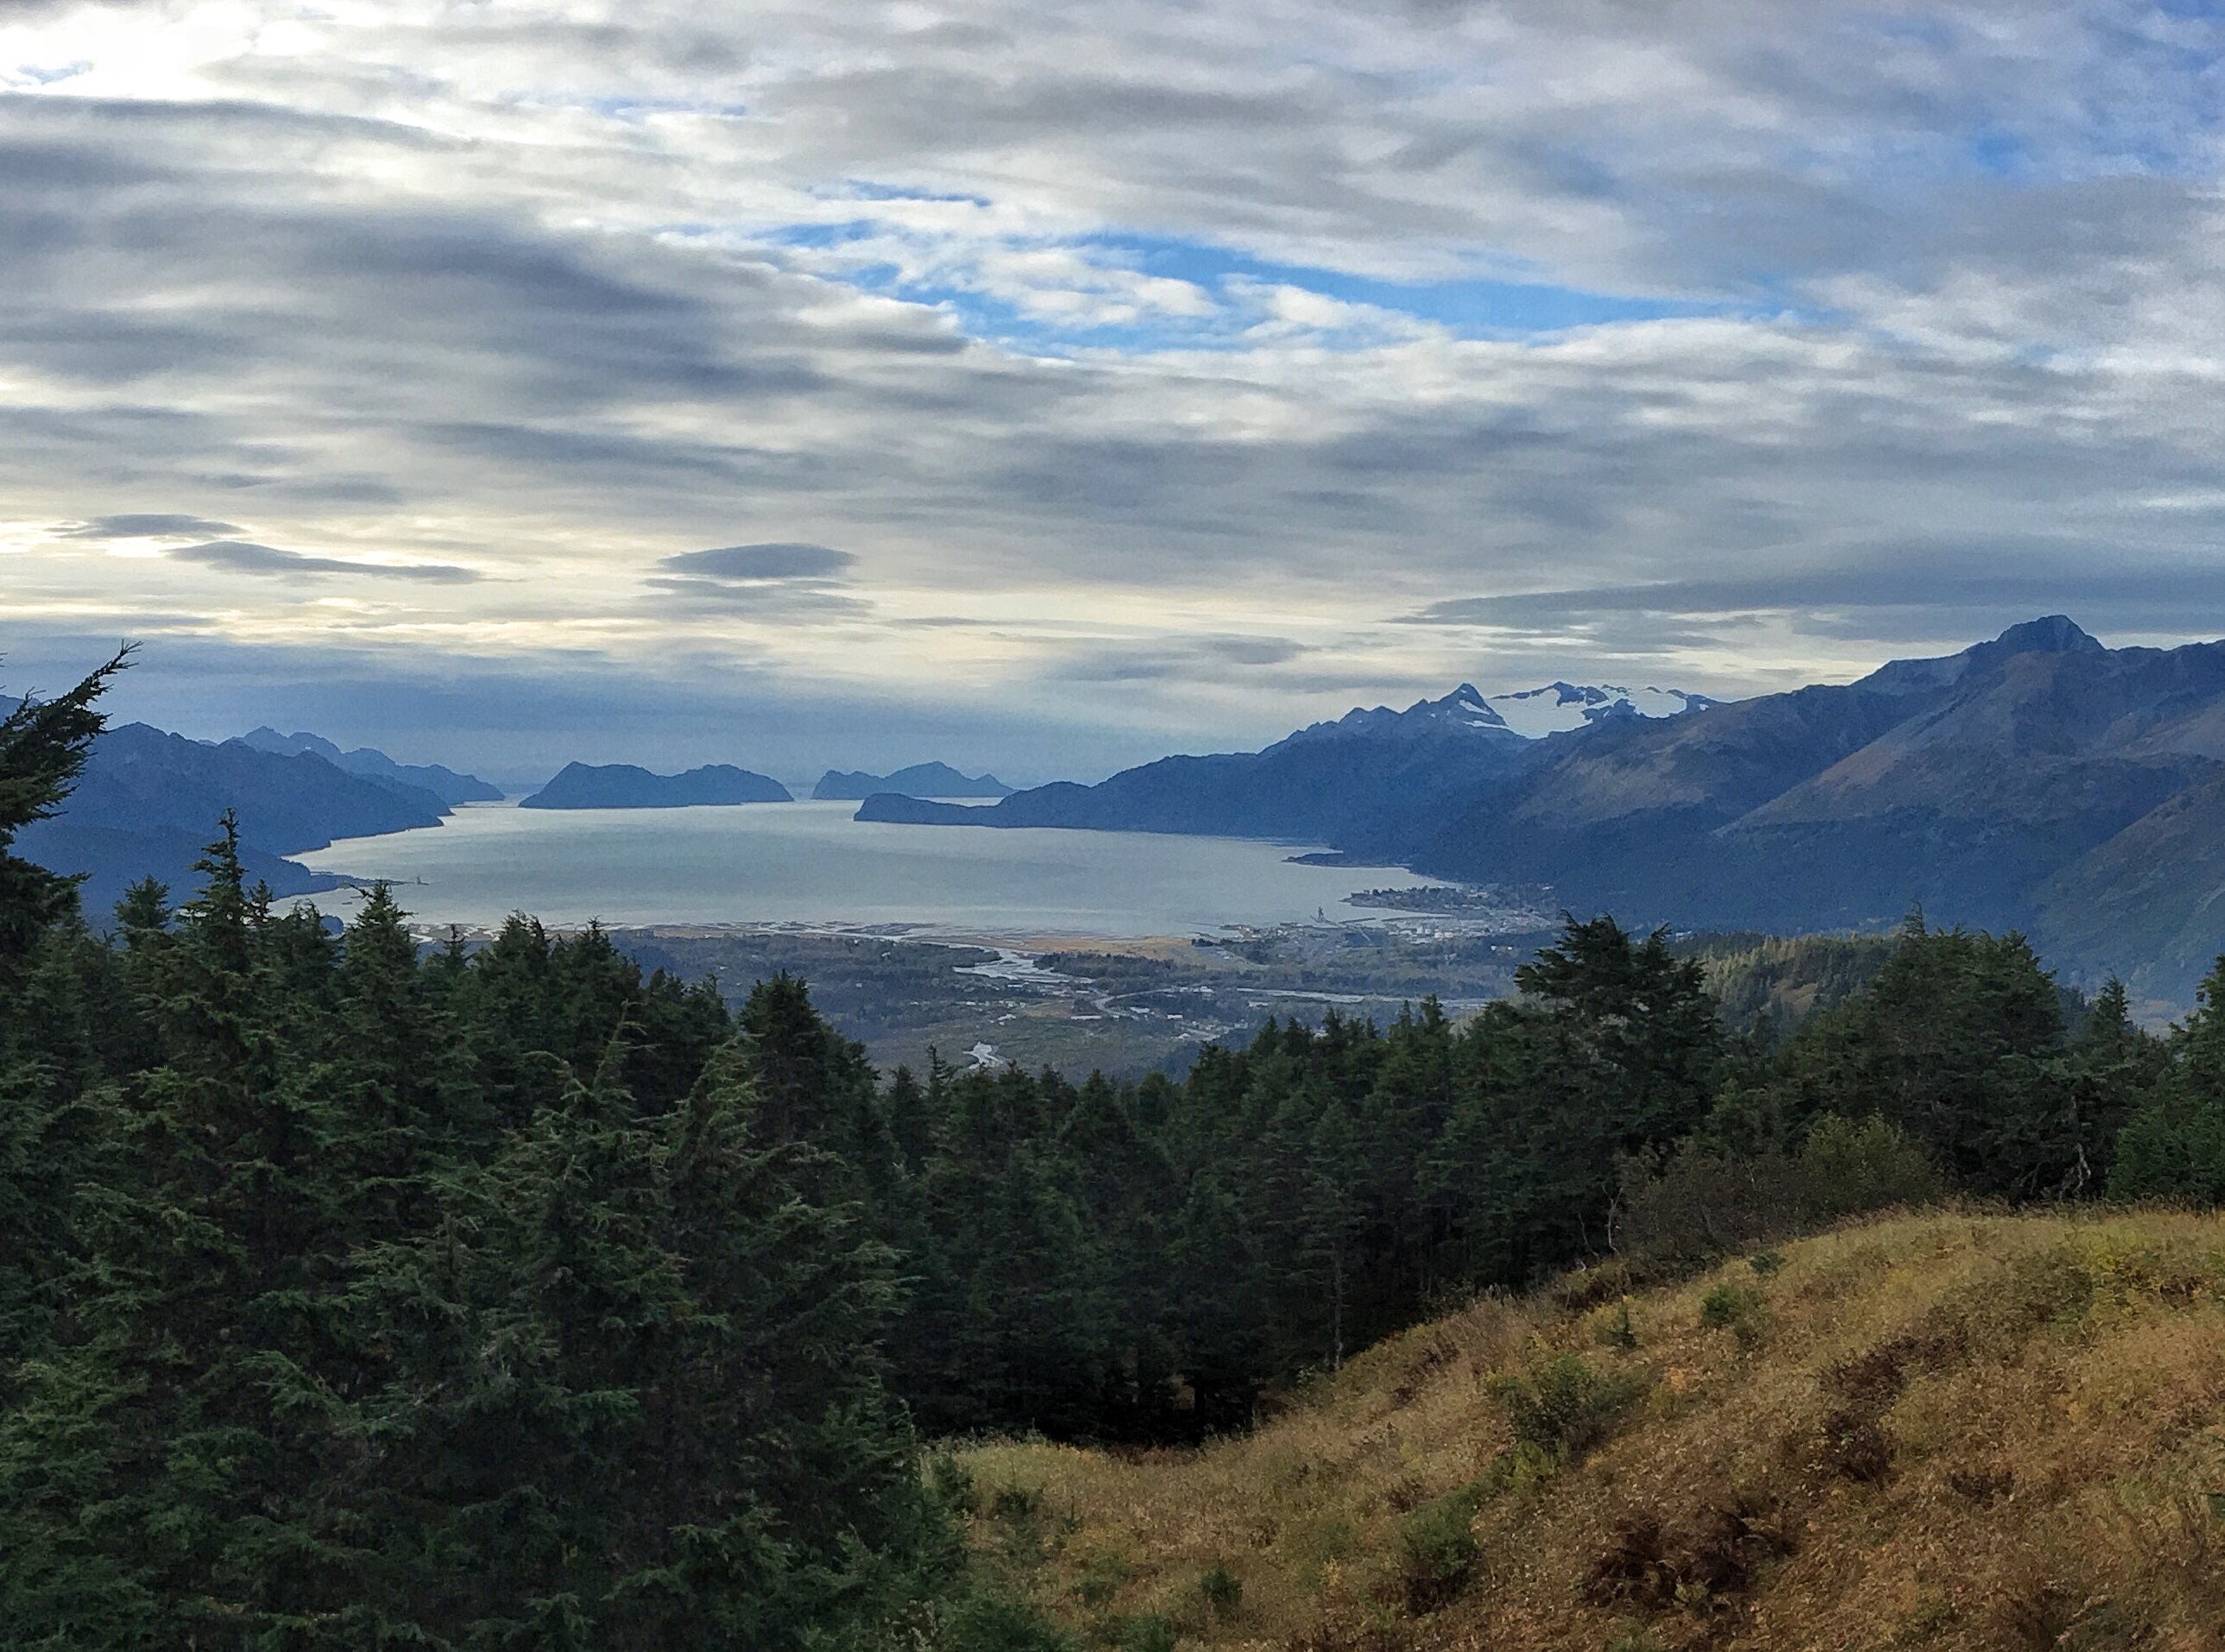 View from the deck overlooking Seward & Resurrection Bay